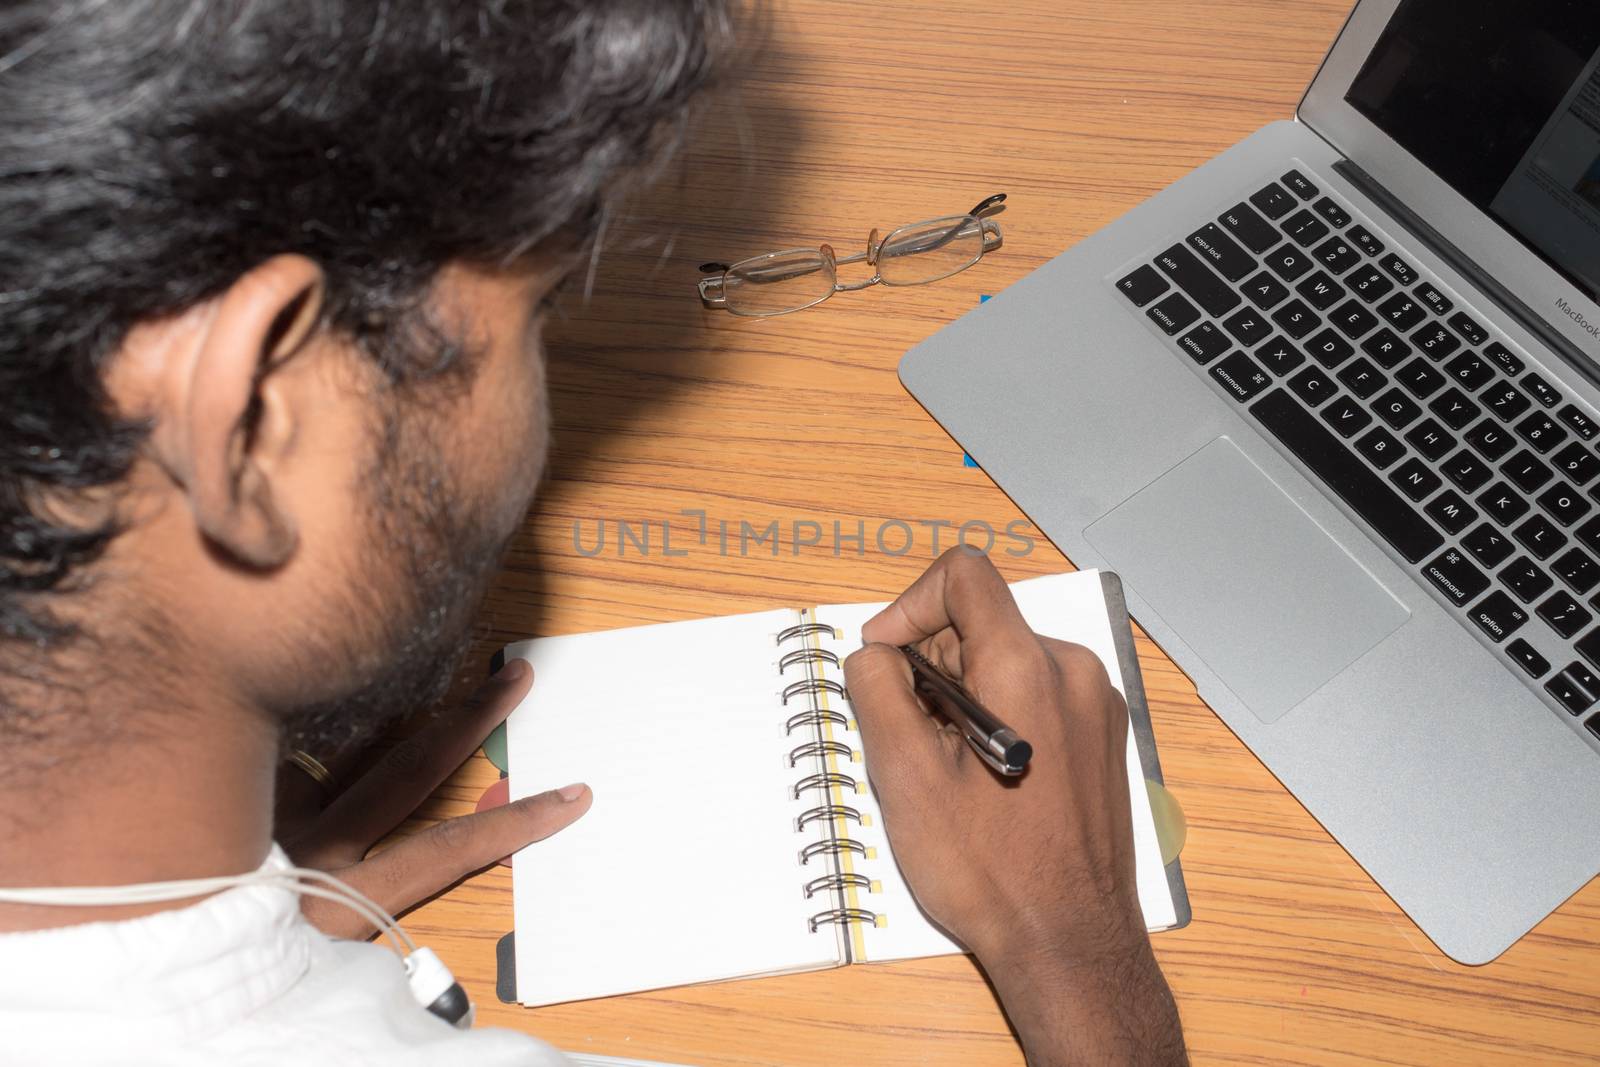 Businessman writing in his diary. Open notebook with blank pages next to cup of coffee and eyeglasses on wooden table. Business still life concept with office stuff on table. Top view with copy space. by sudiptabhowmick